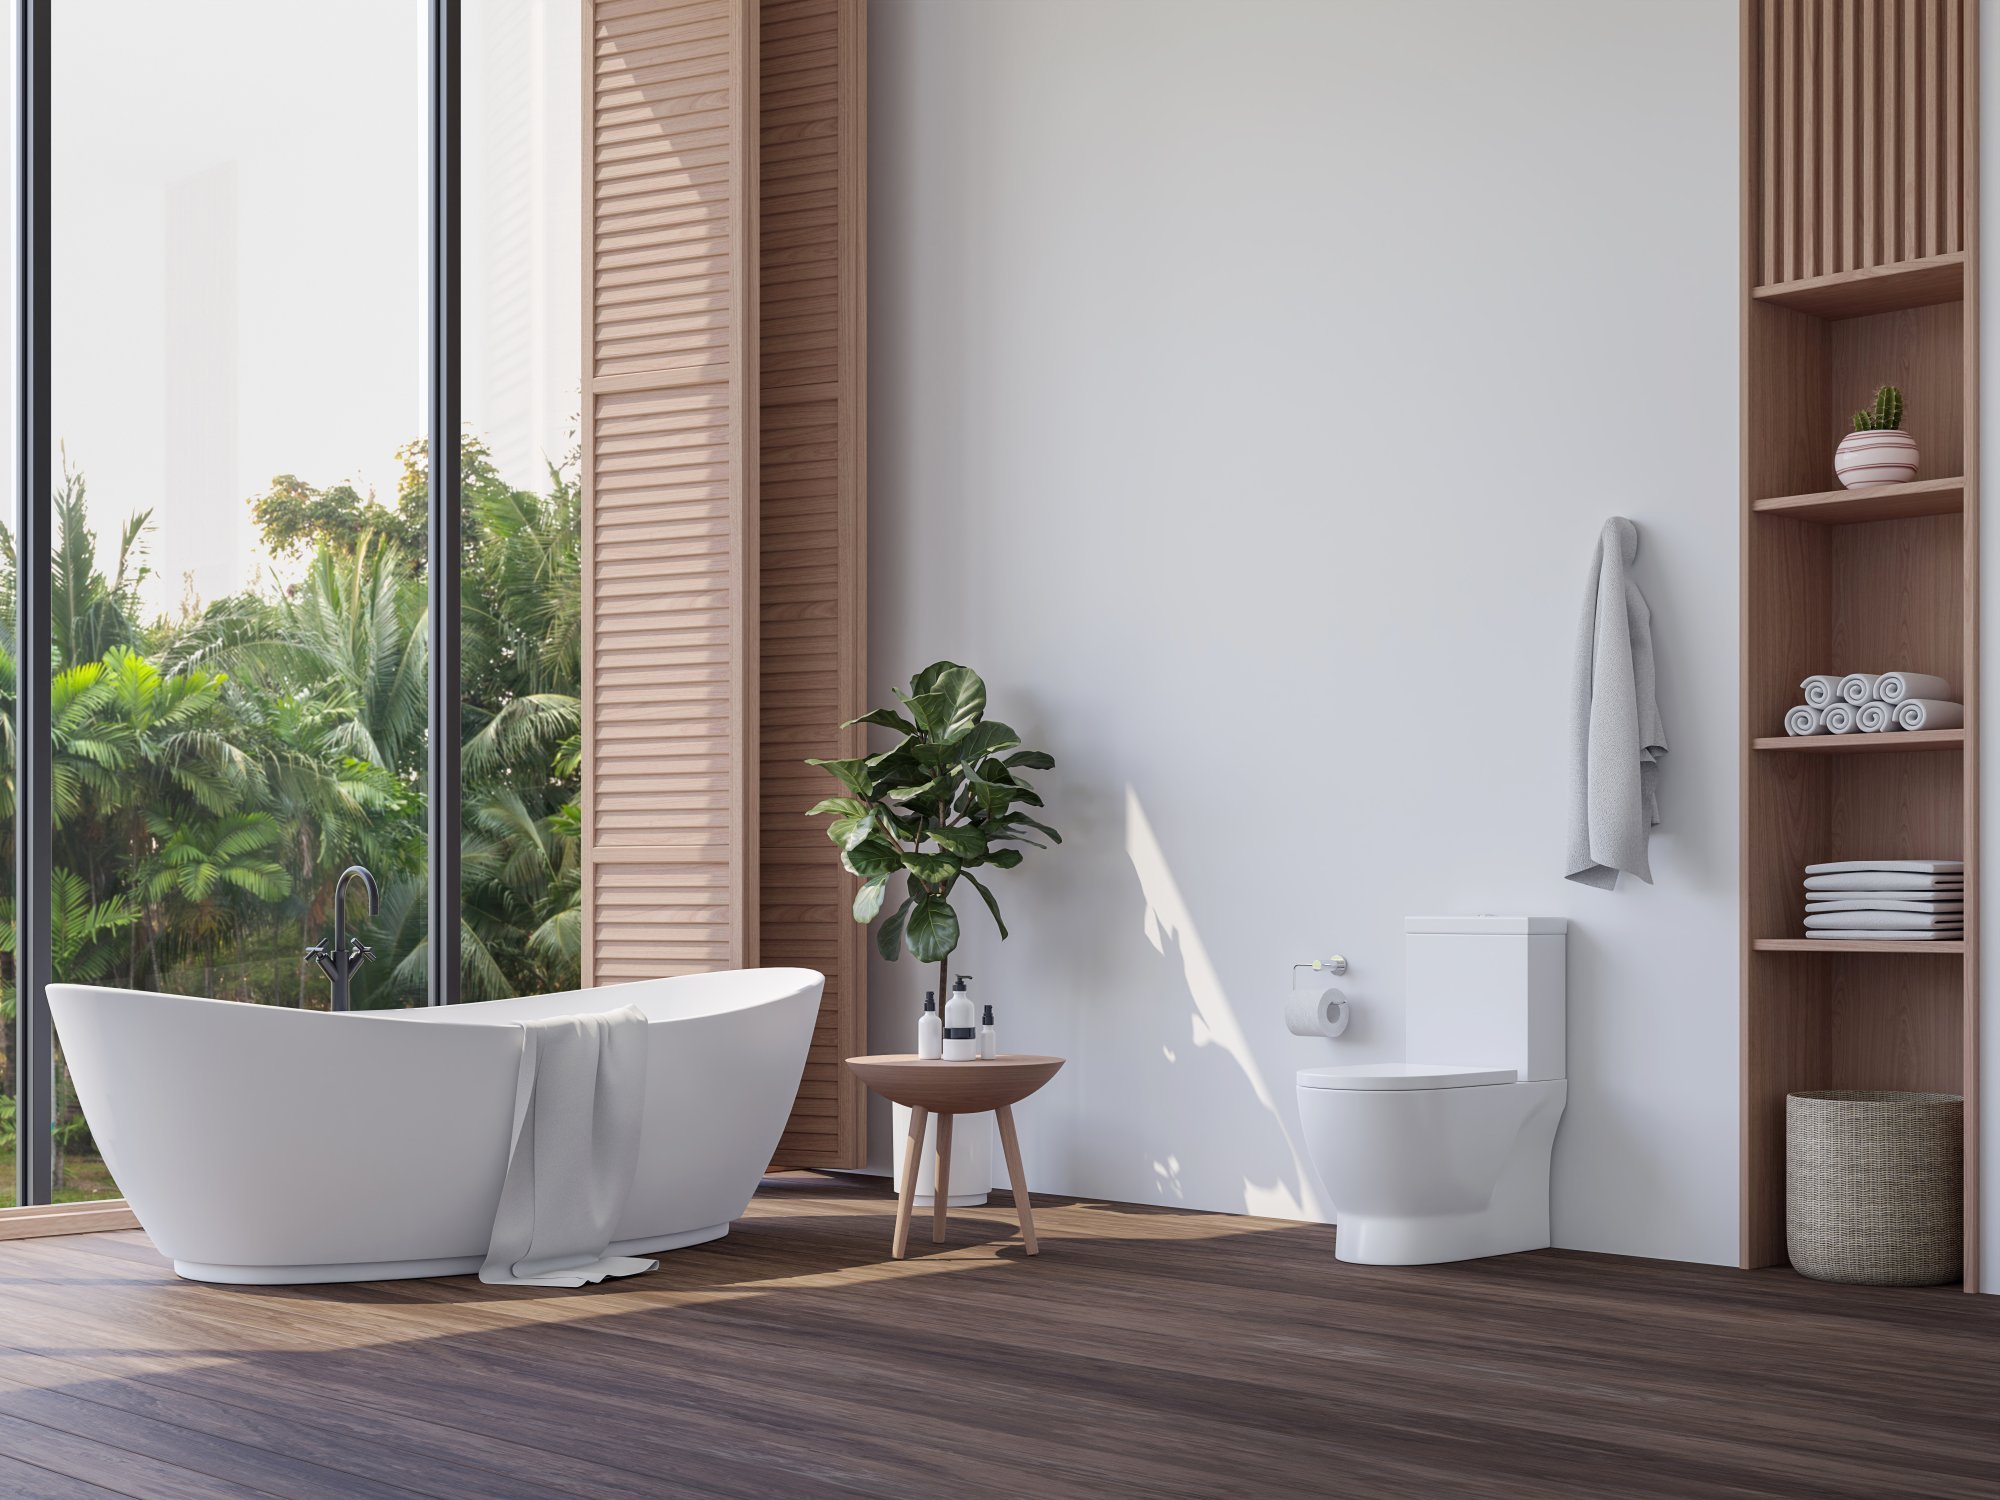 modern-contemporary-bathroom-with-tropical-style-garden-view-3d-render-overlook-nature-view.jpg